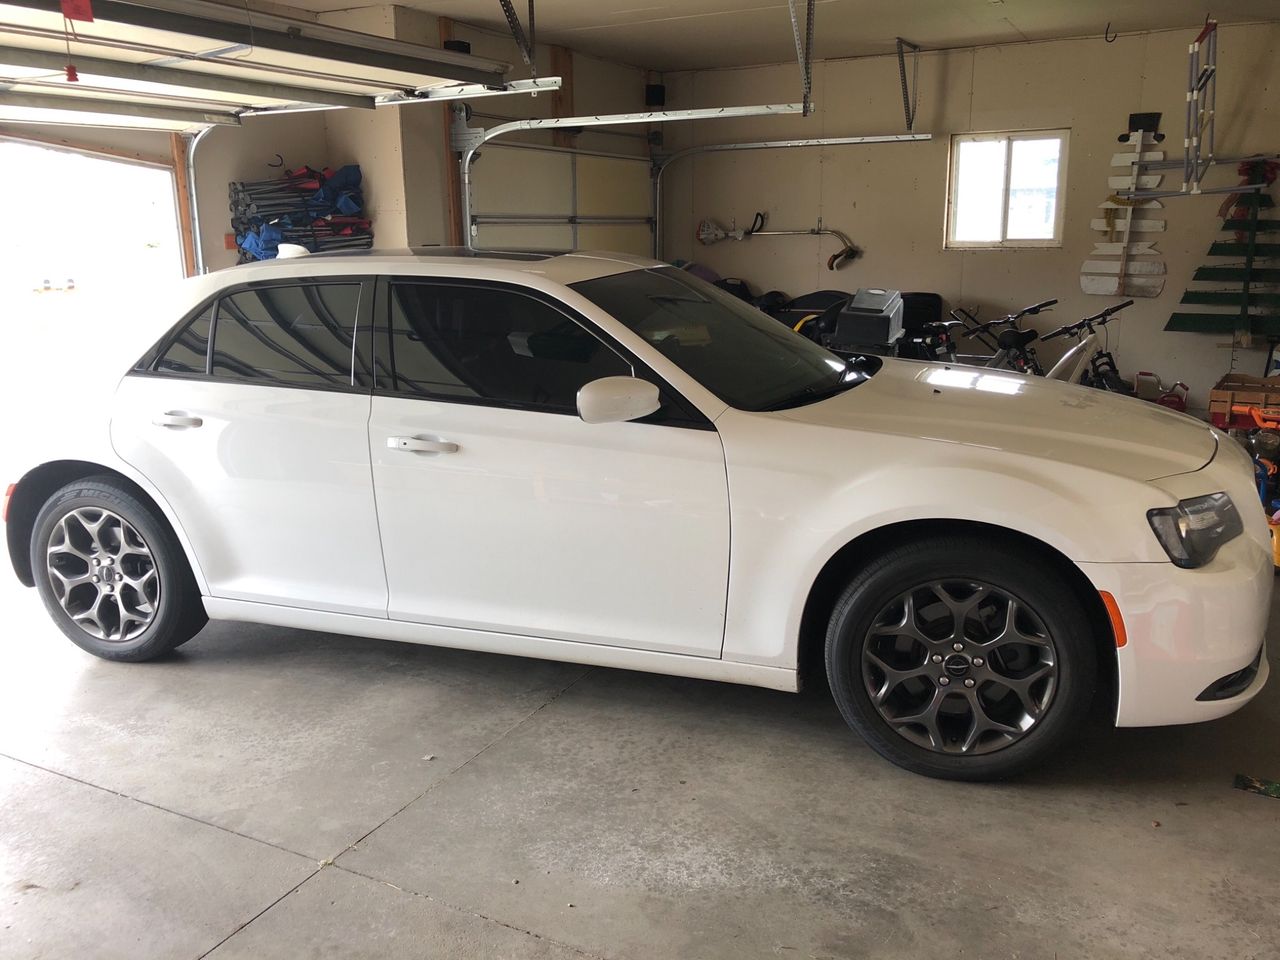 2015 Chrysler 300 S | Sioux Falls, SD, Bright White Clear Coat (White)